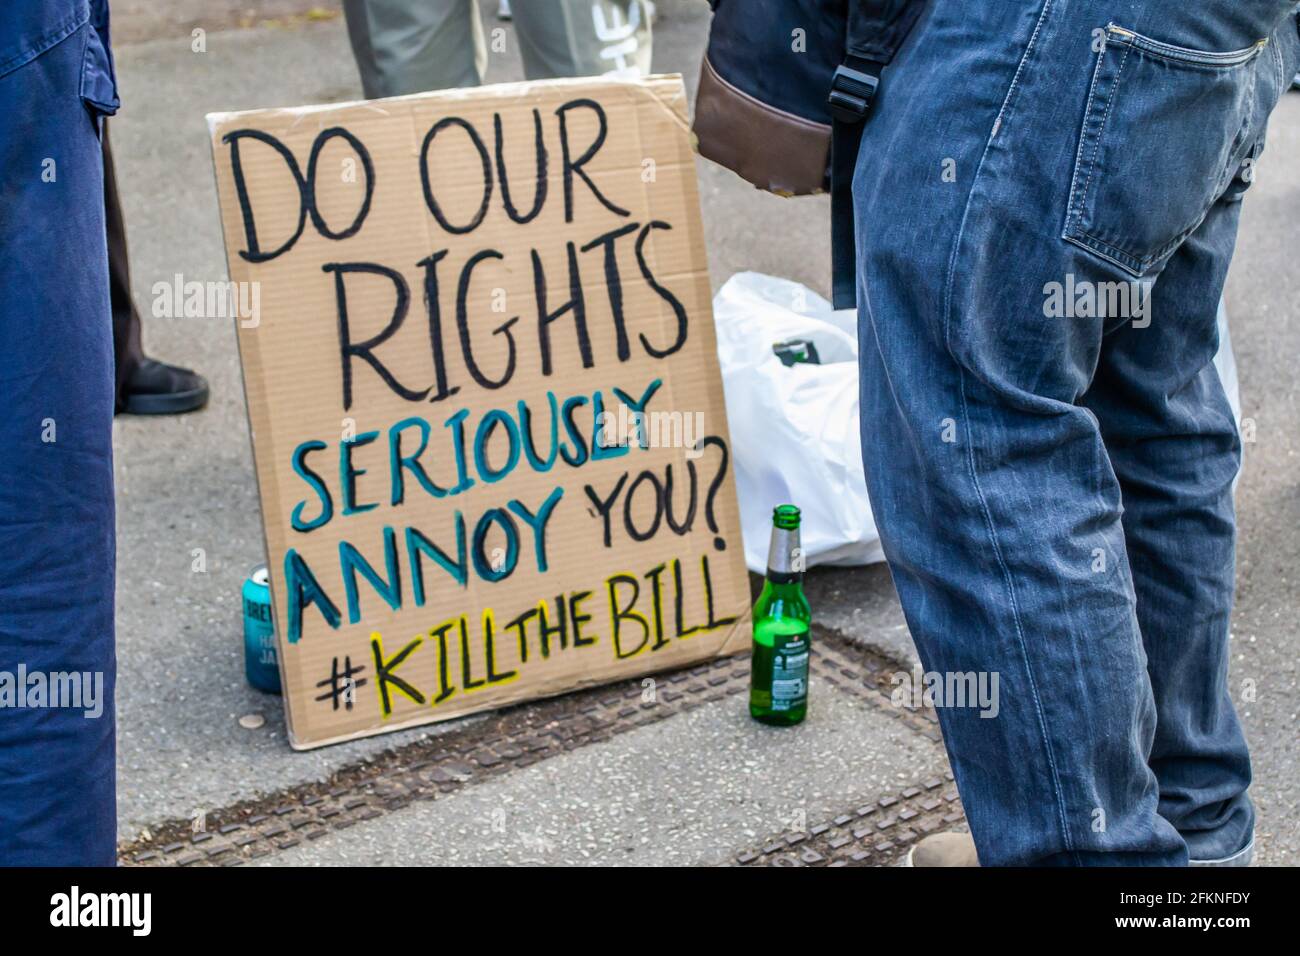 VAUXHALL, LONDON, ENGLAND- 1 May 2021: Protest placard on the floor at a KILL THE BILL protest in London Stock Photo